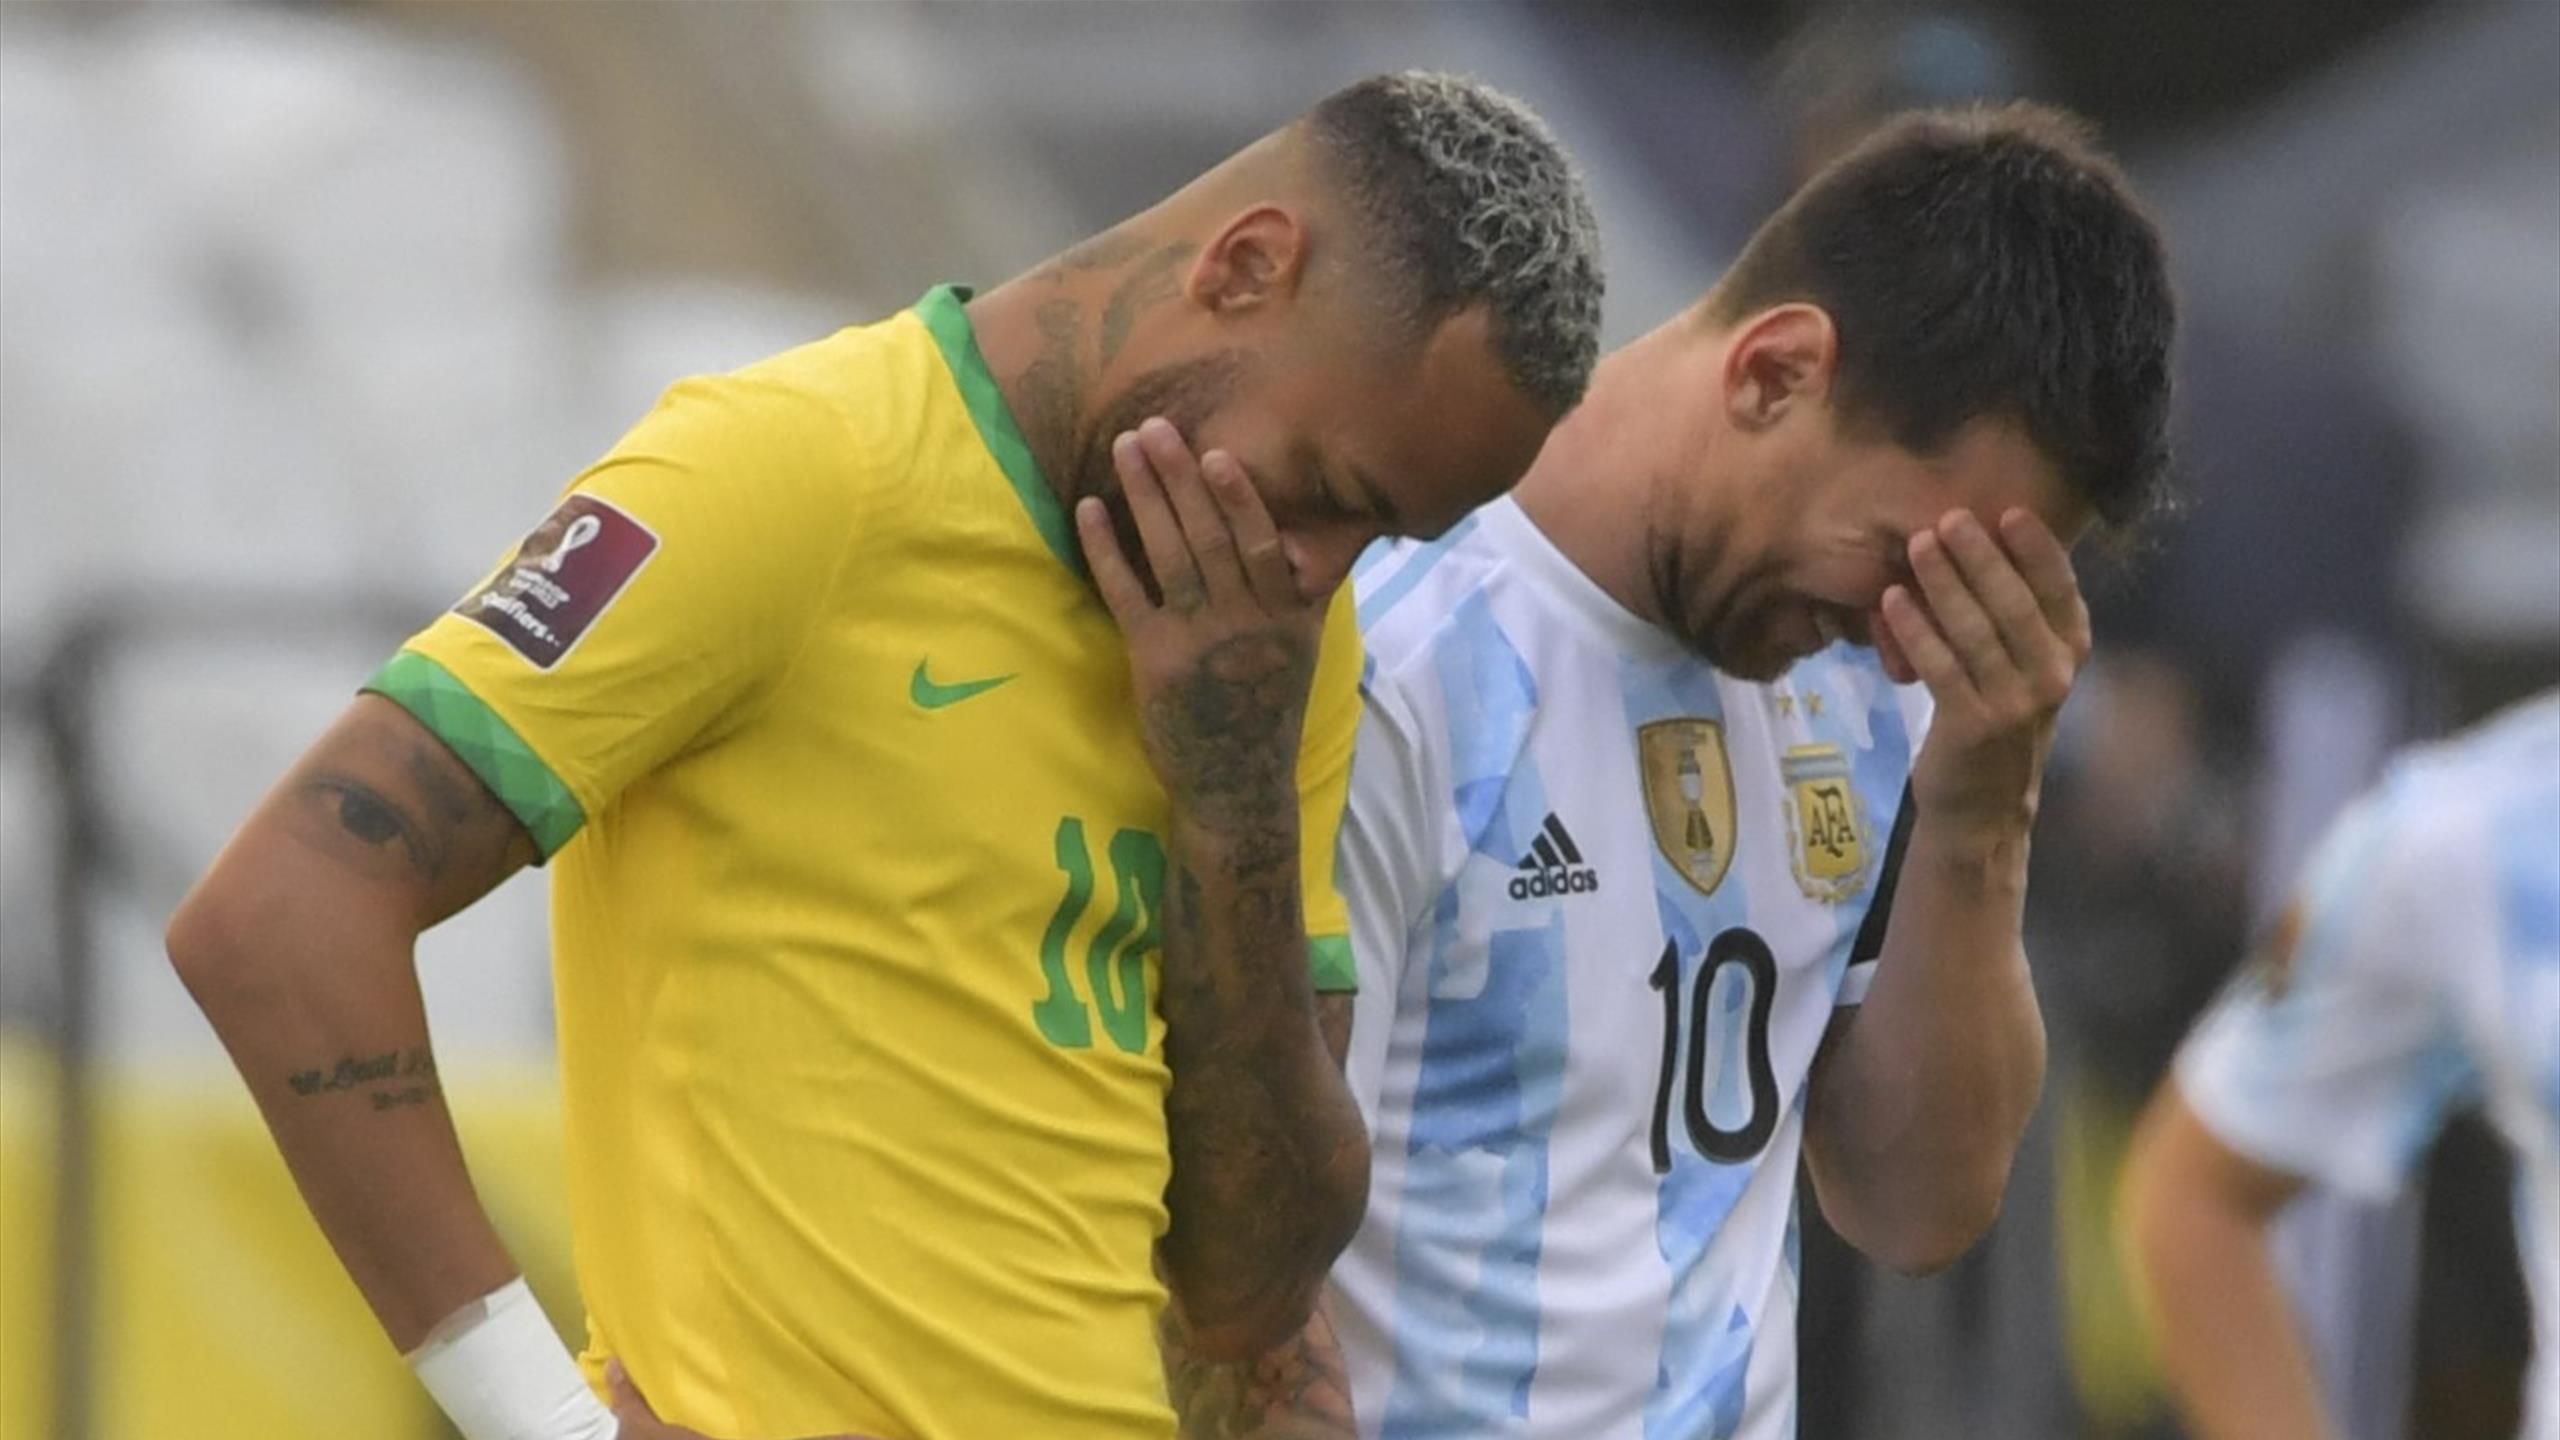 Brazil v Argentina abandoned after health officials try to deport four players DURING GAME